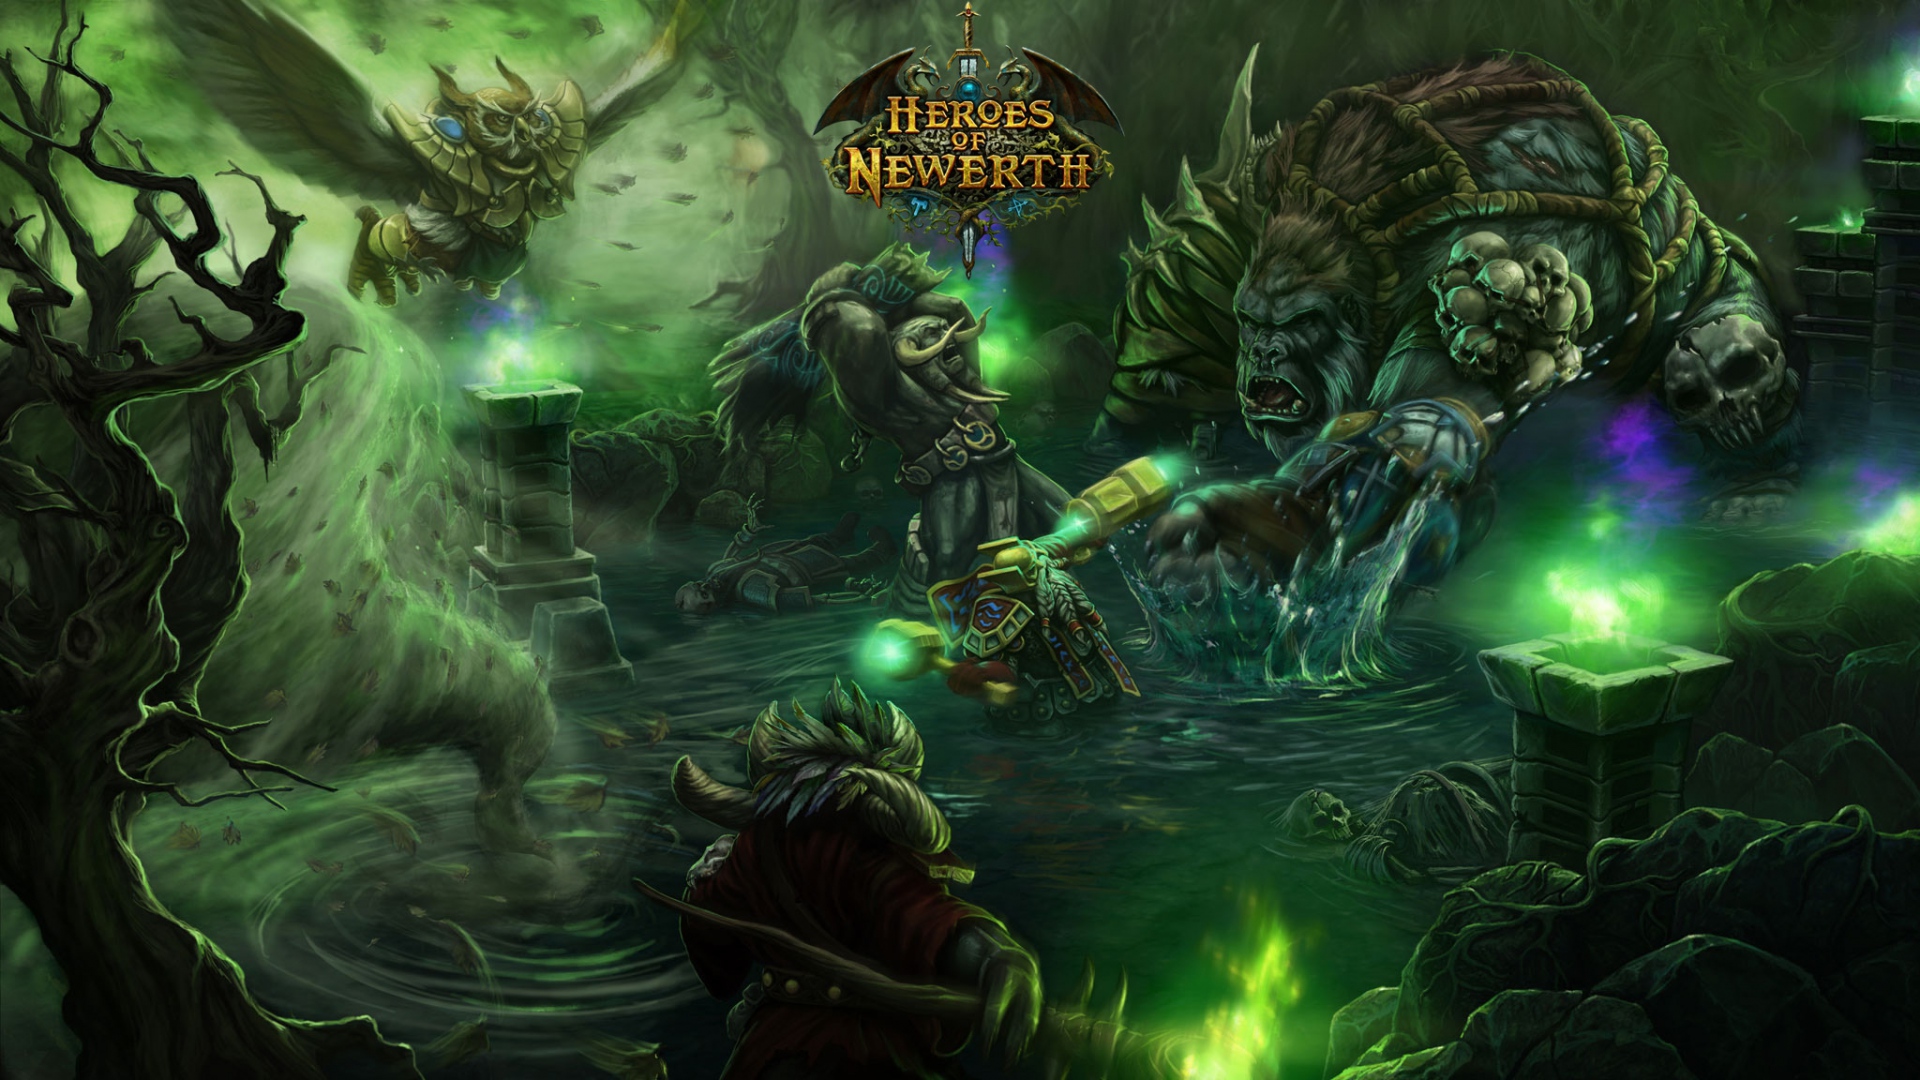 1920x1080 Wallpaper world of warcraft heroes of newerth characters